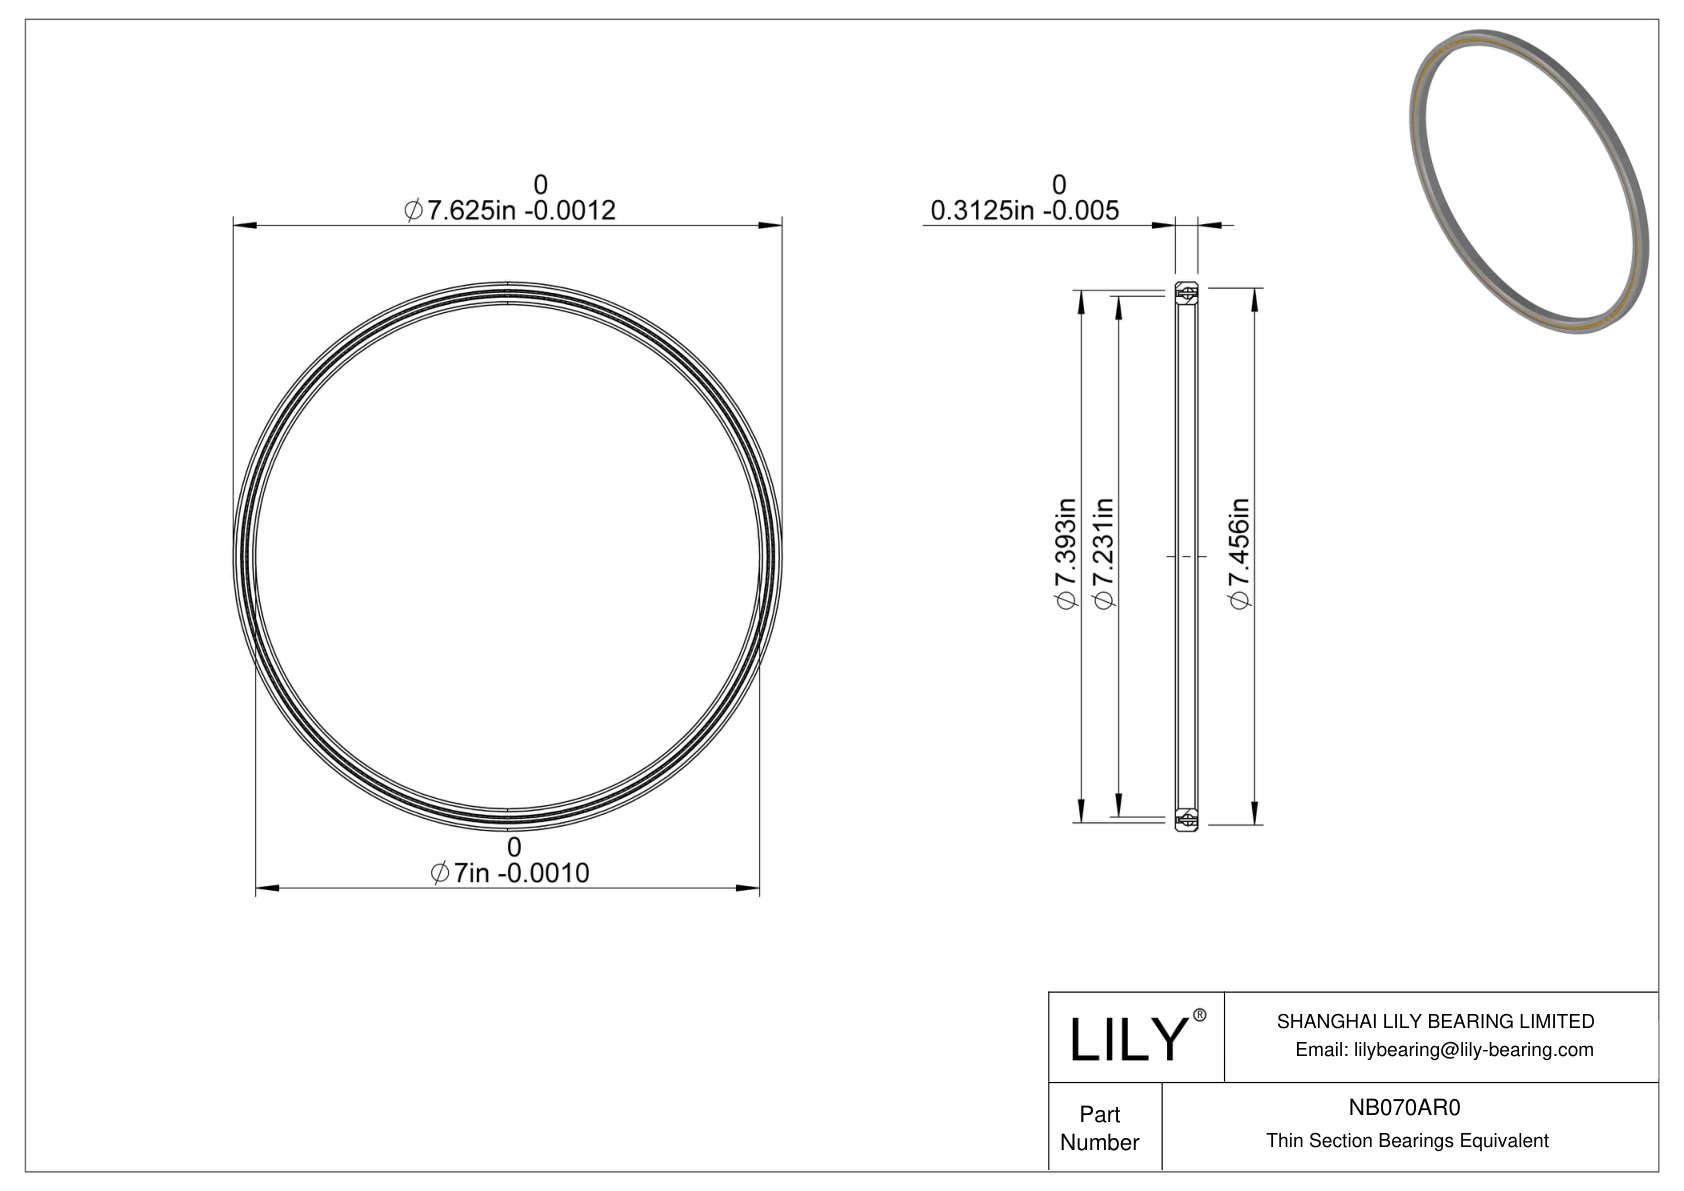 NB070AR0 Constant Section (CS) Bearings cad drawing